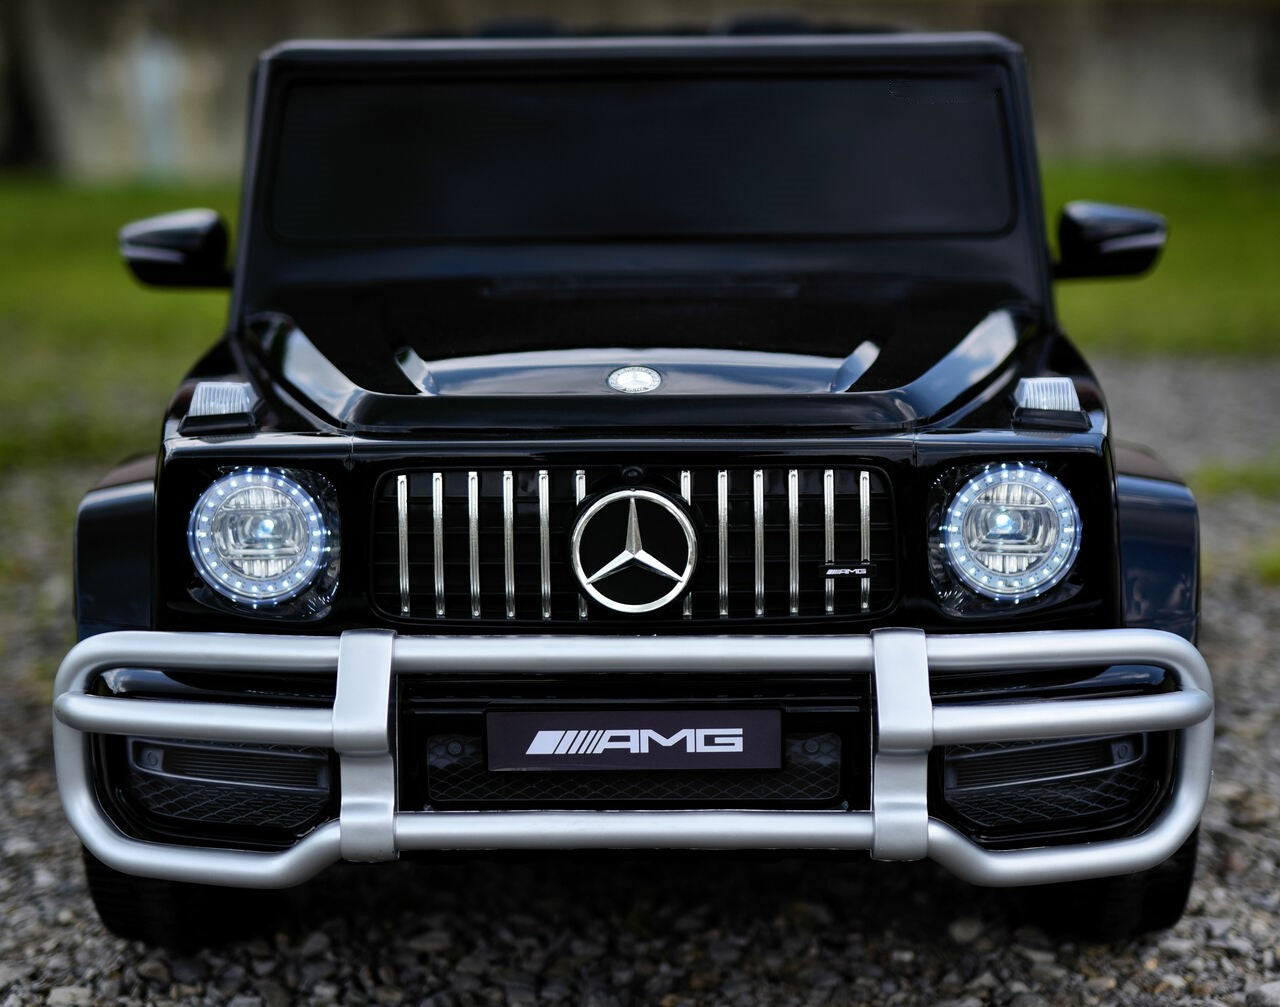 2023 Mercedes Benz G63 AMG V6 Car | 2 Seater > 24V (4x4) | Electric Riding Vehicle for Kids